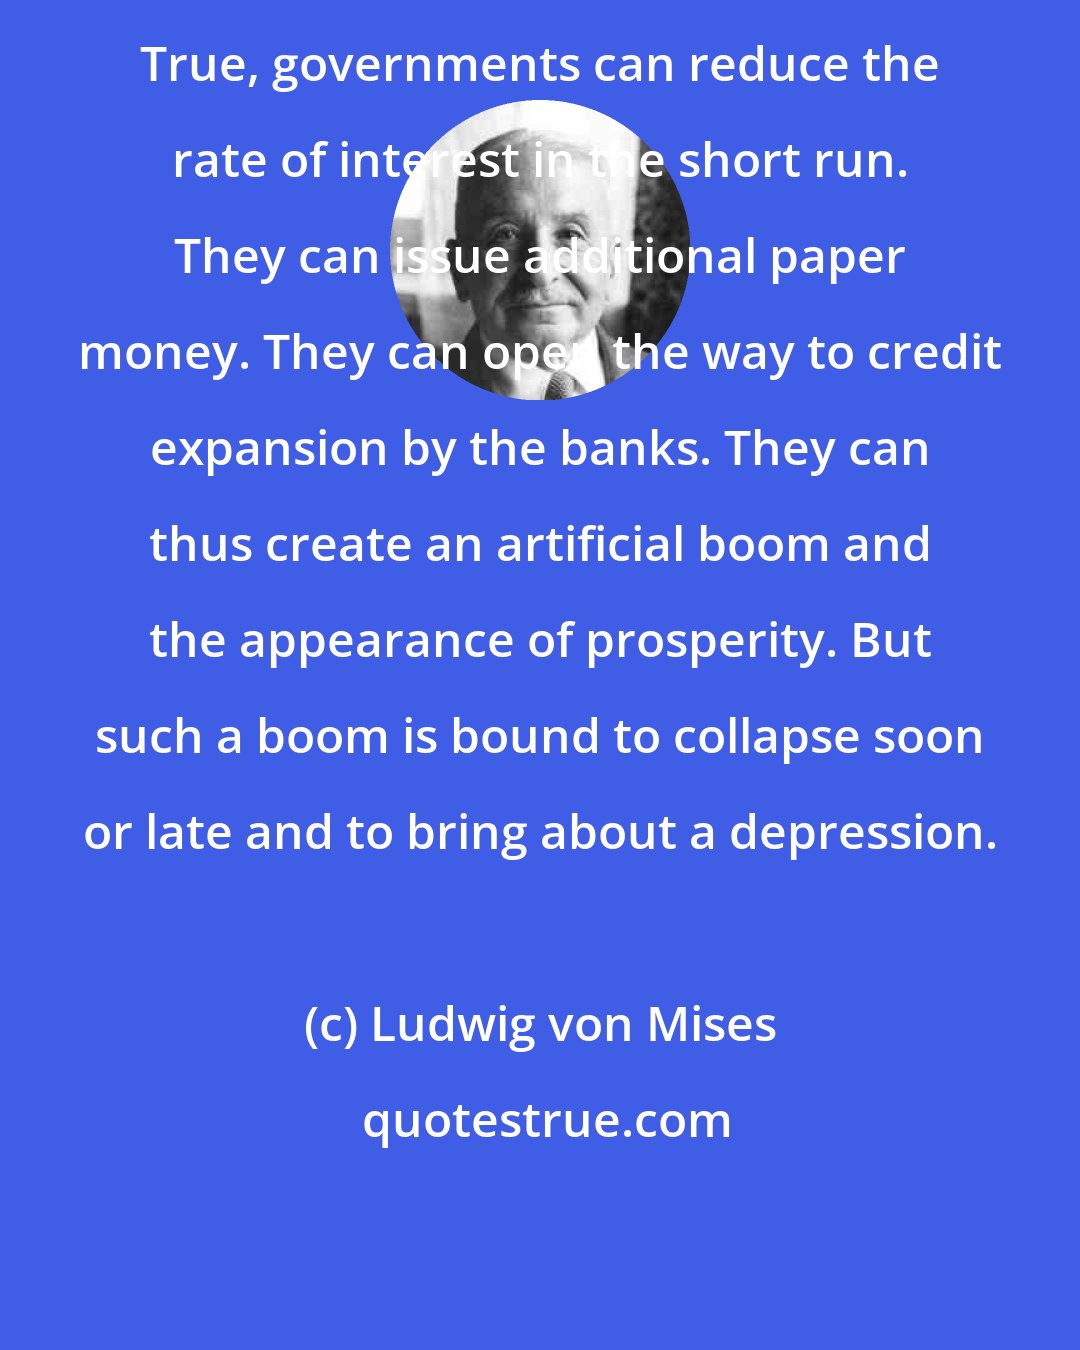 Ludwig von Mises: True, governments can reduce the rate of interest in the short run. They can issue additional paper money. They can open the way to credit expansion by the banks. They can thus create an artificial boom and the appearance of prosperity. But such a boom is bound to collapse soon or late and to bring about a depression.